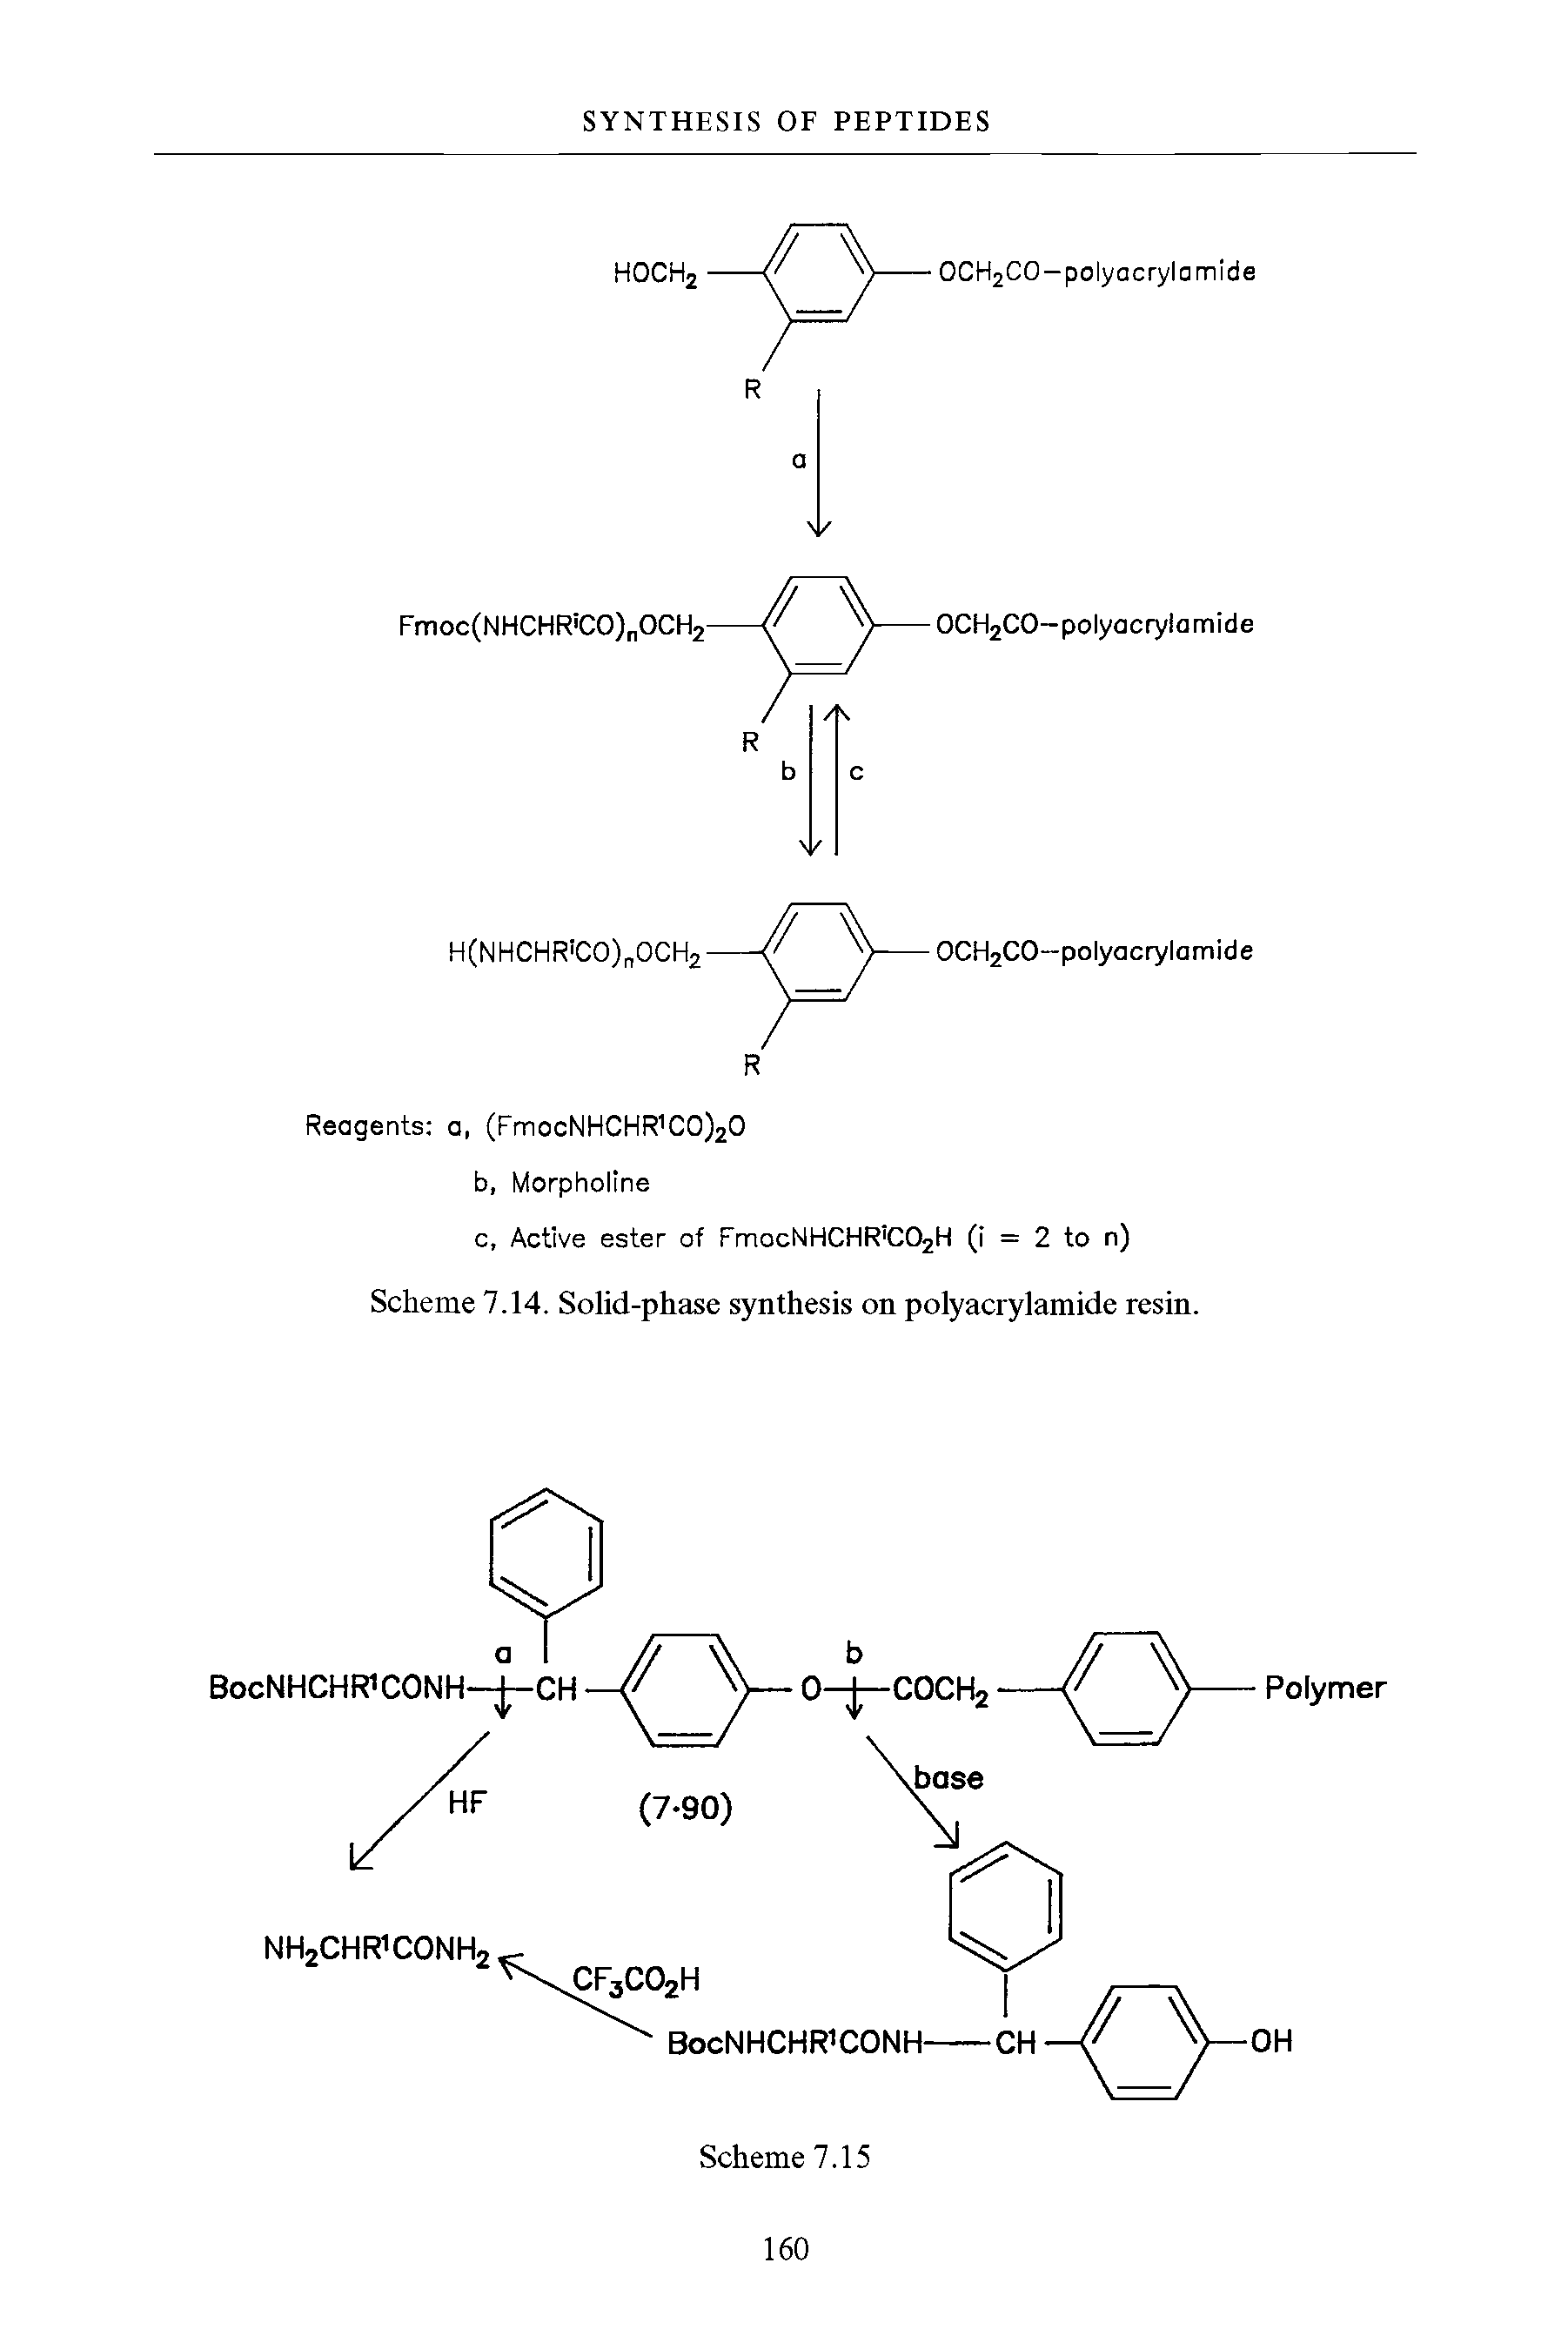 Scheme 7.14. Solid-phase synthesis on polyacrylamide resin.